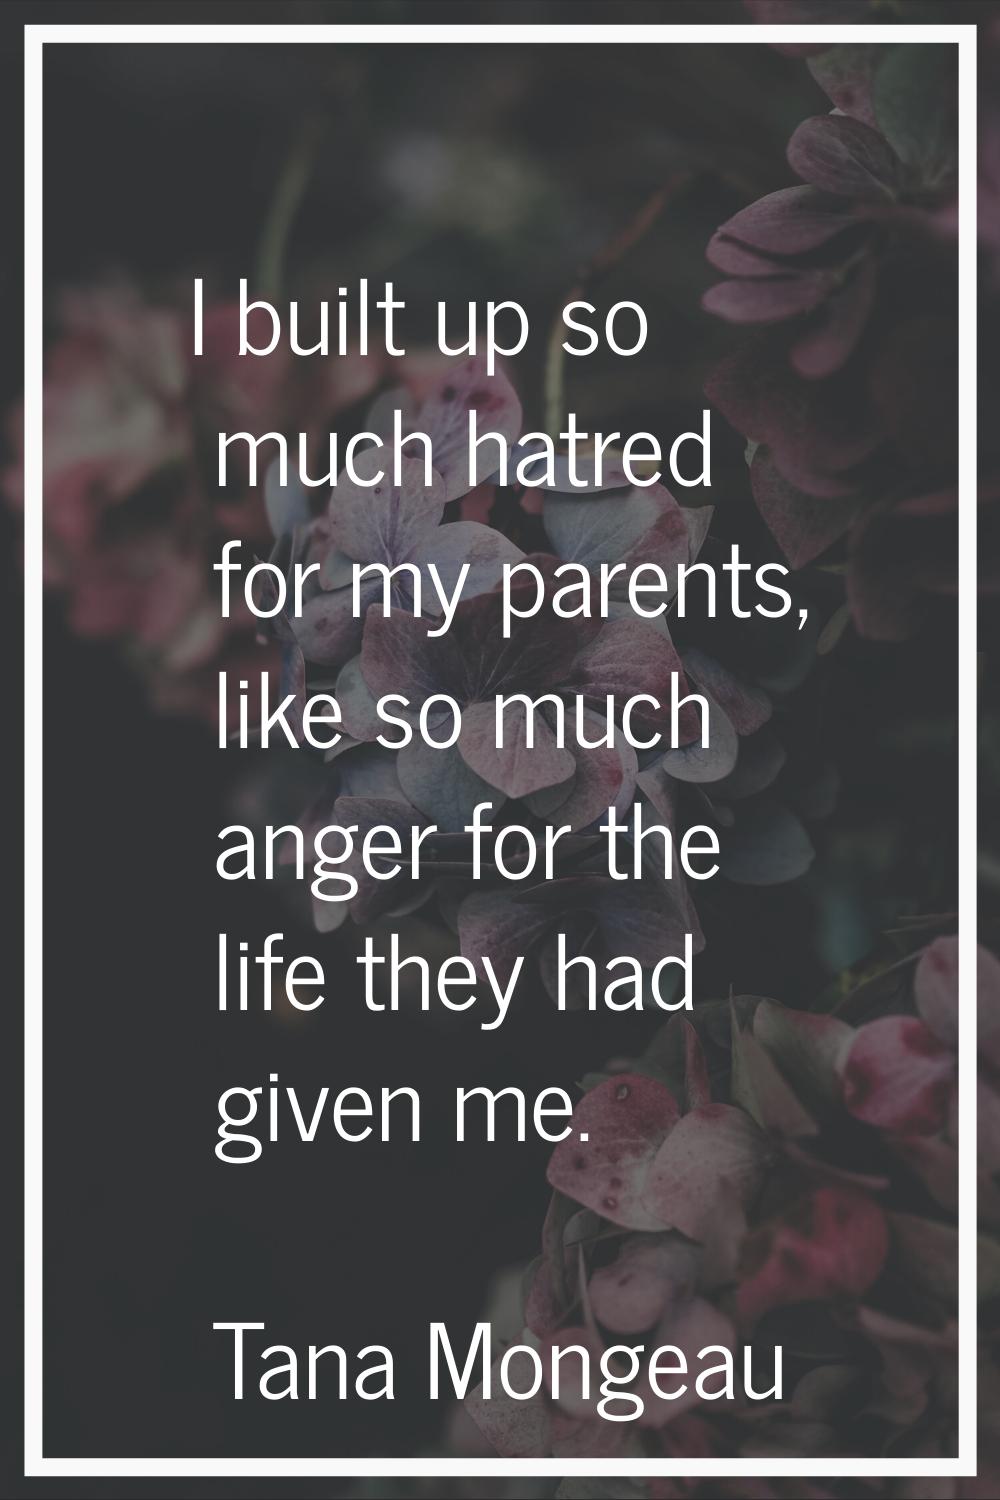 I built up so much hatred for my parents, like so much anger for the life they had given me.